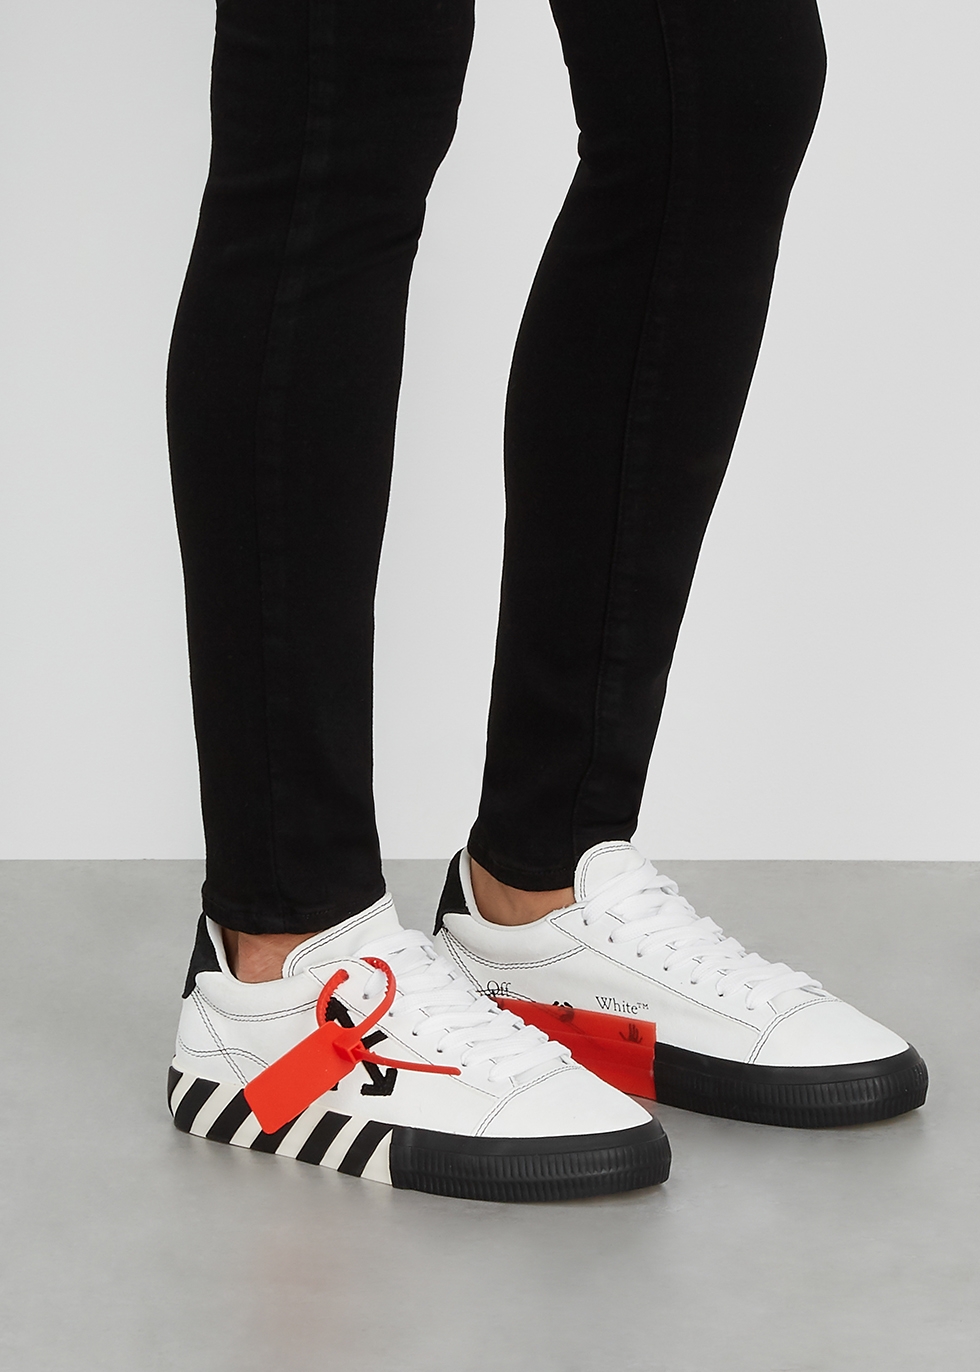 Off-White Low Vulcanized white suede 